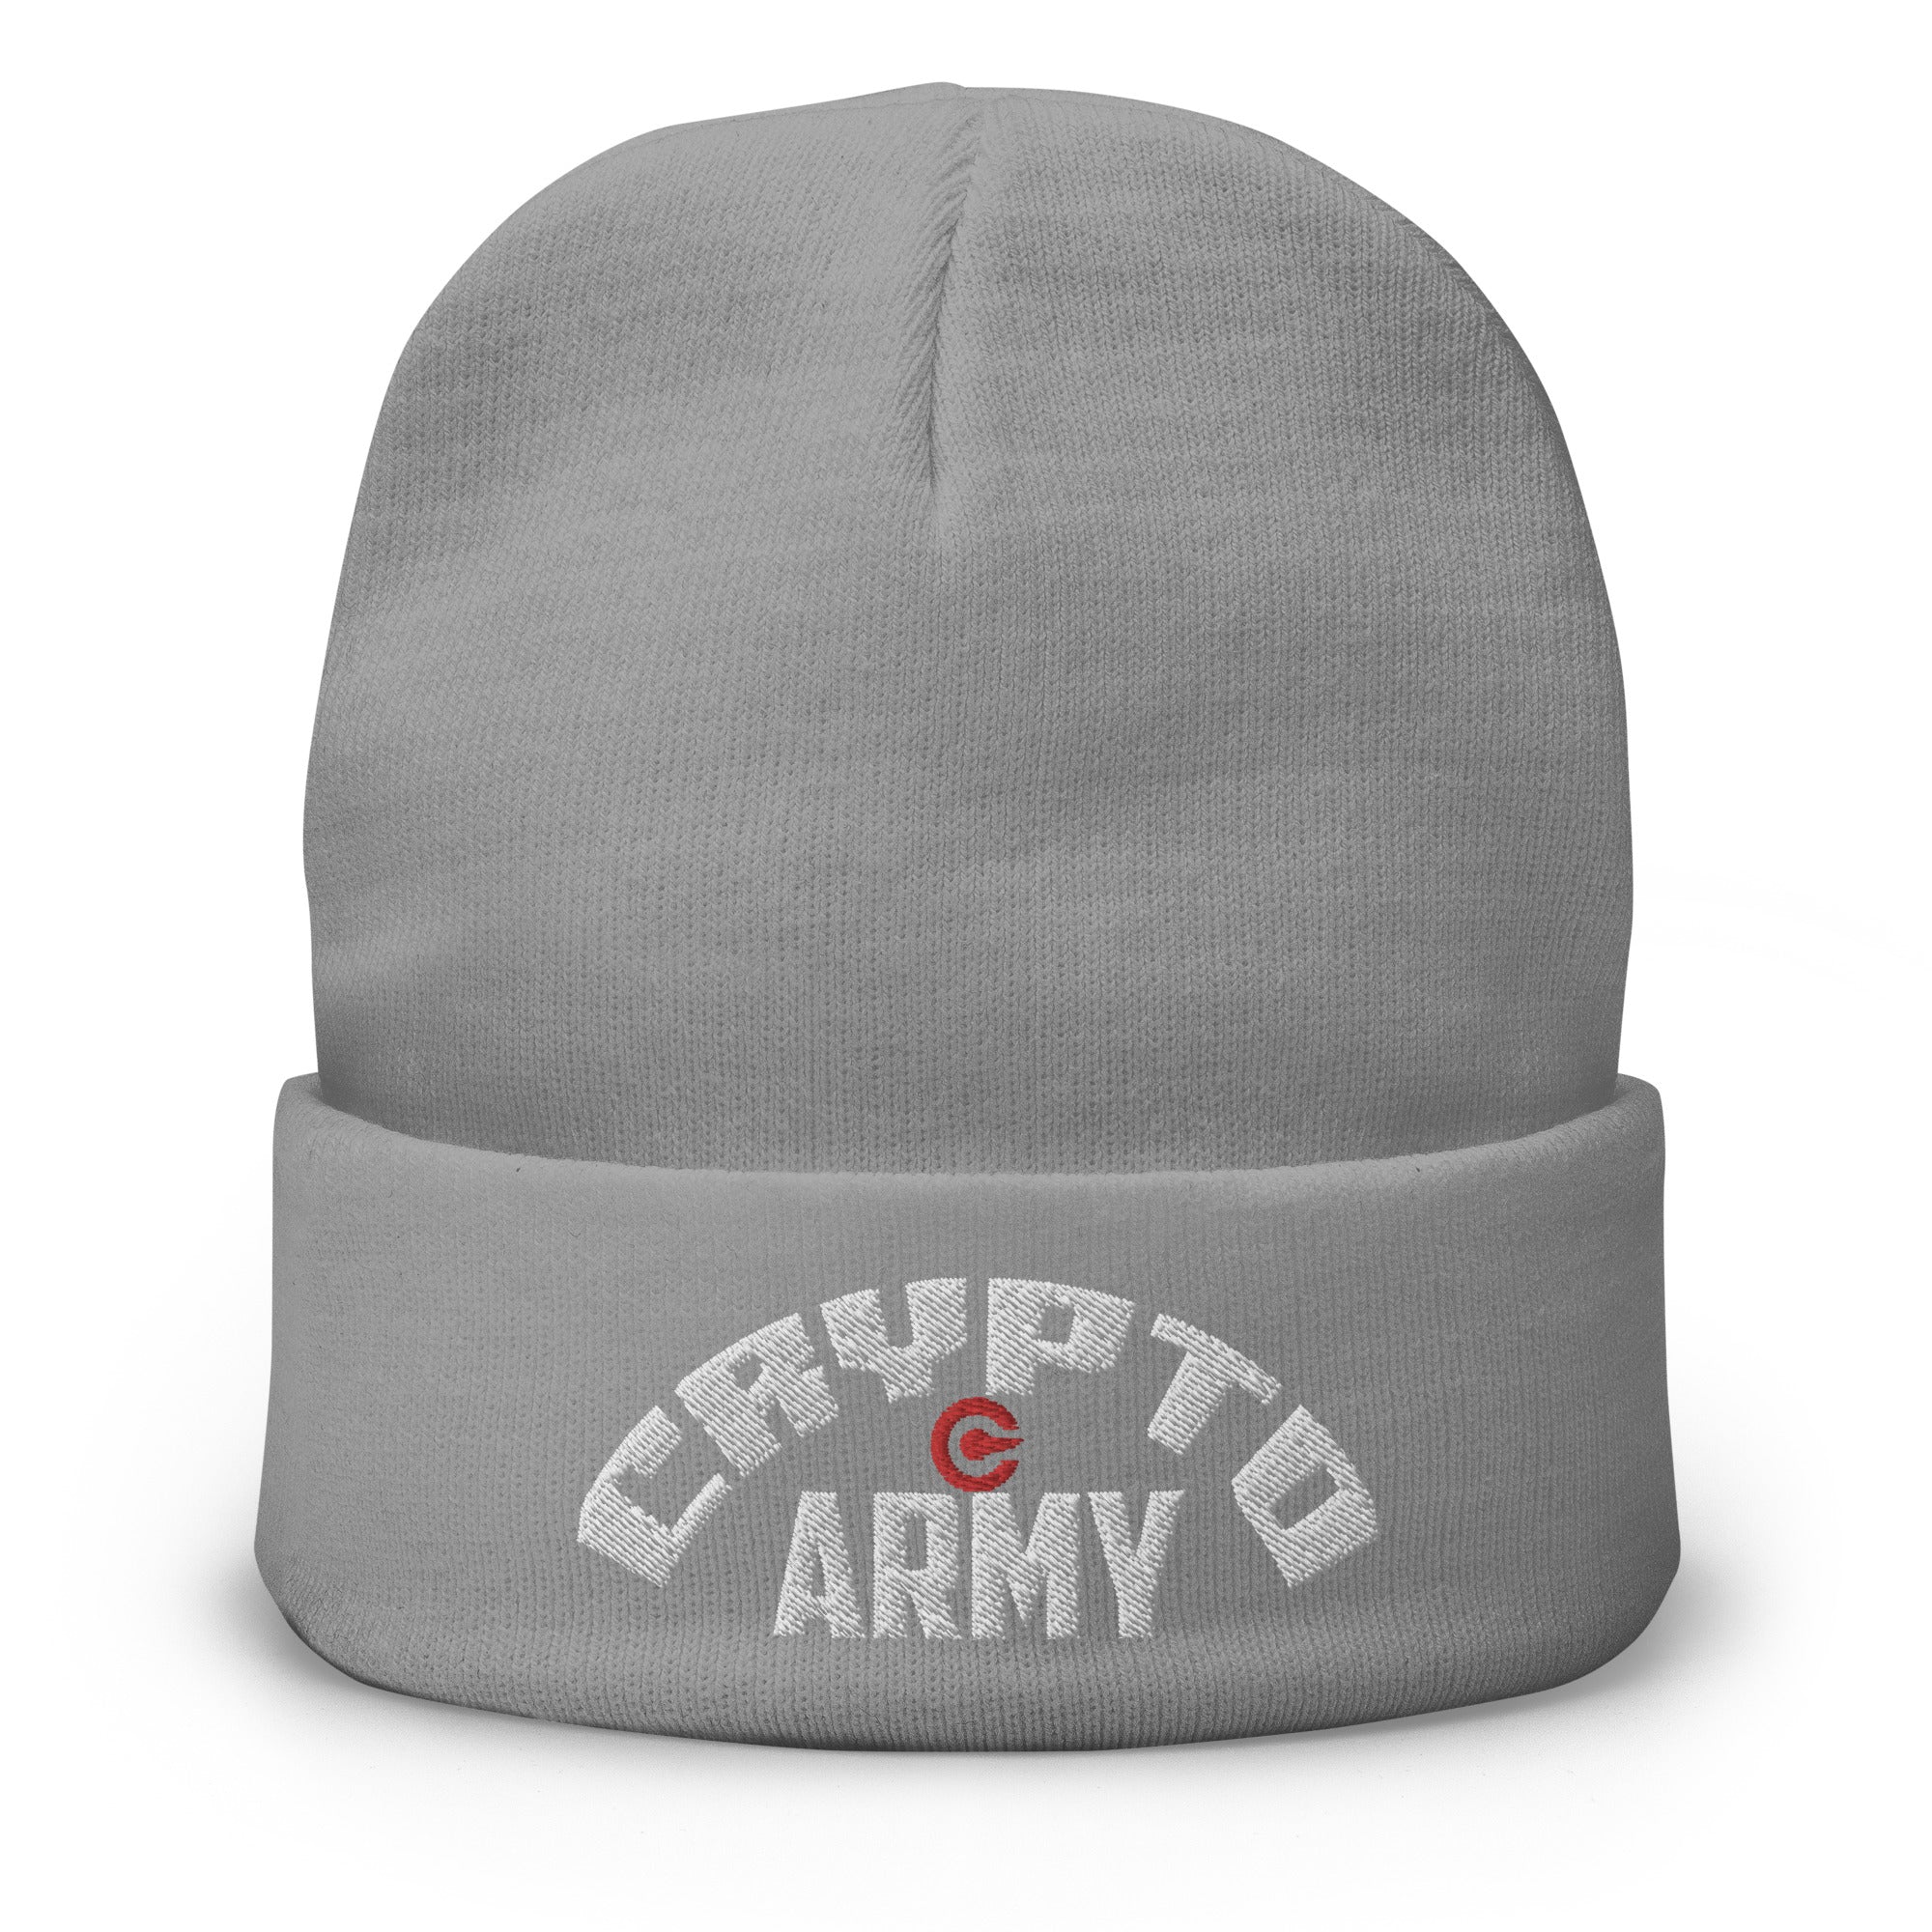 Crypto Army Curved Cryptocurrency Symbol Embroidered Cuff Beanie Cap